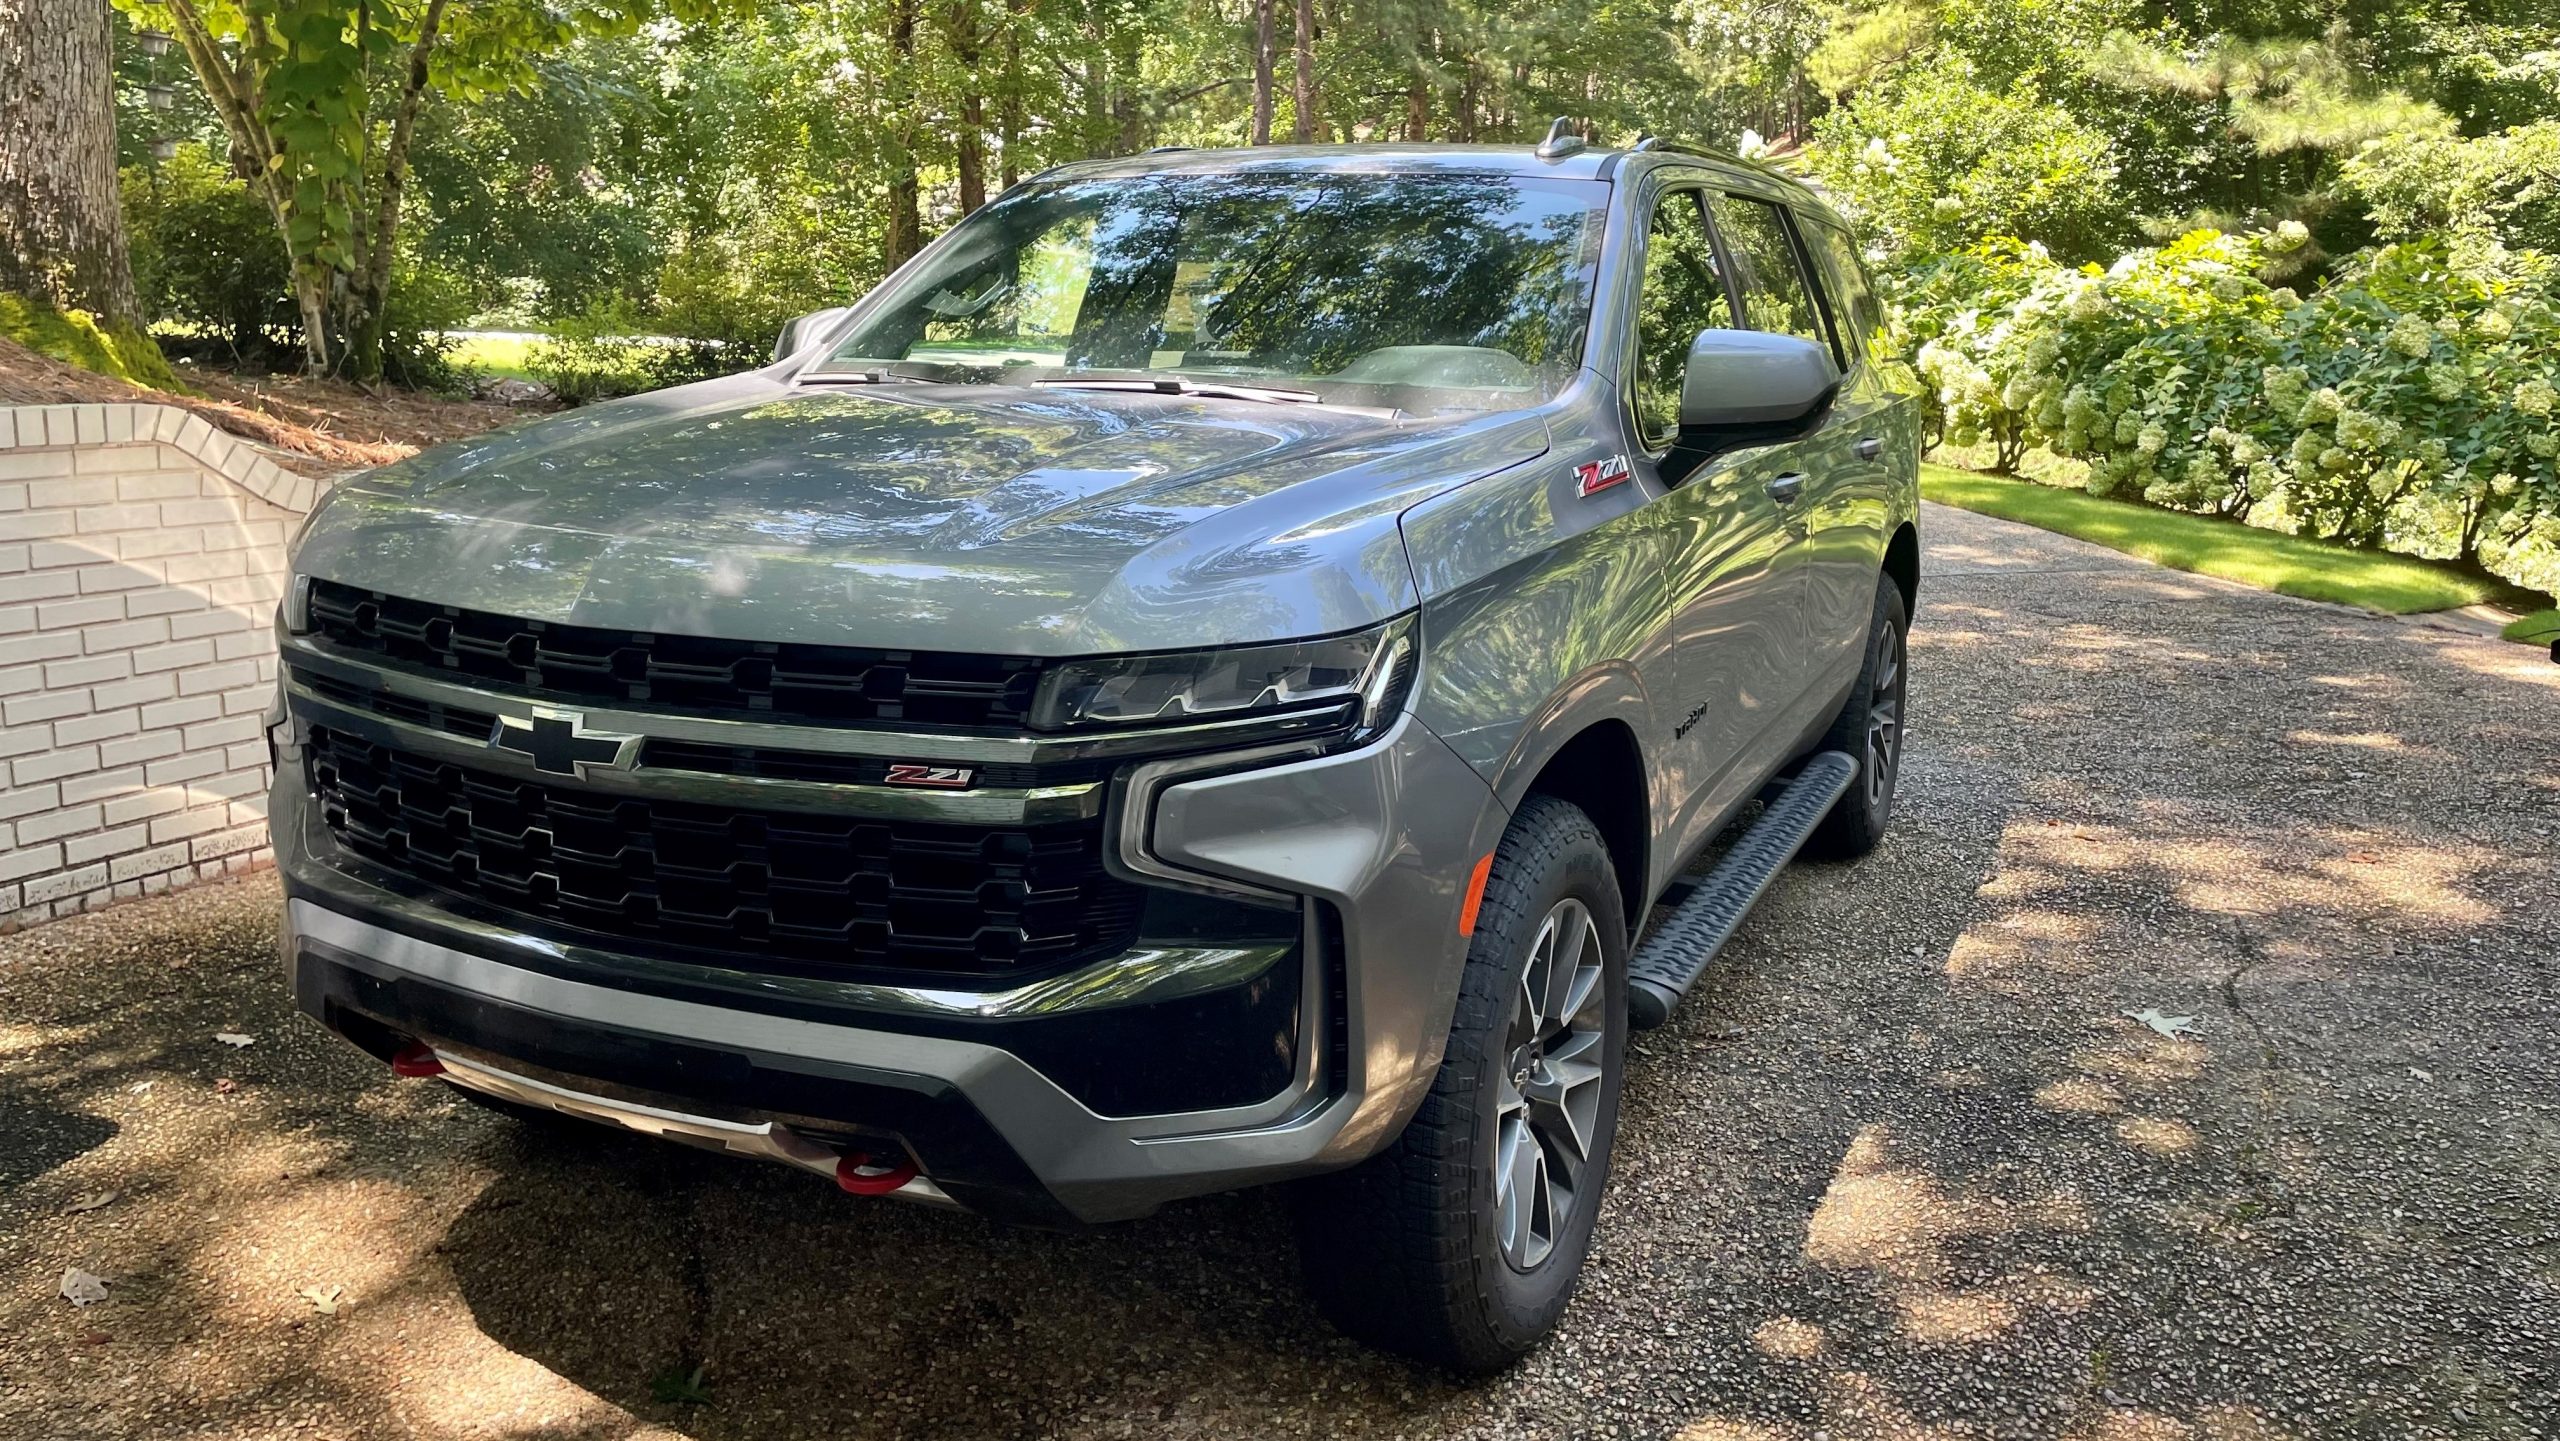 2021 Tahoe Z71 An Owners Review Donohoo Chevrolet Blog